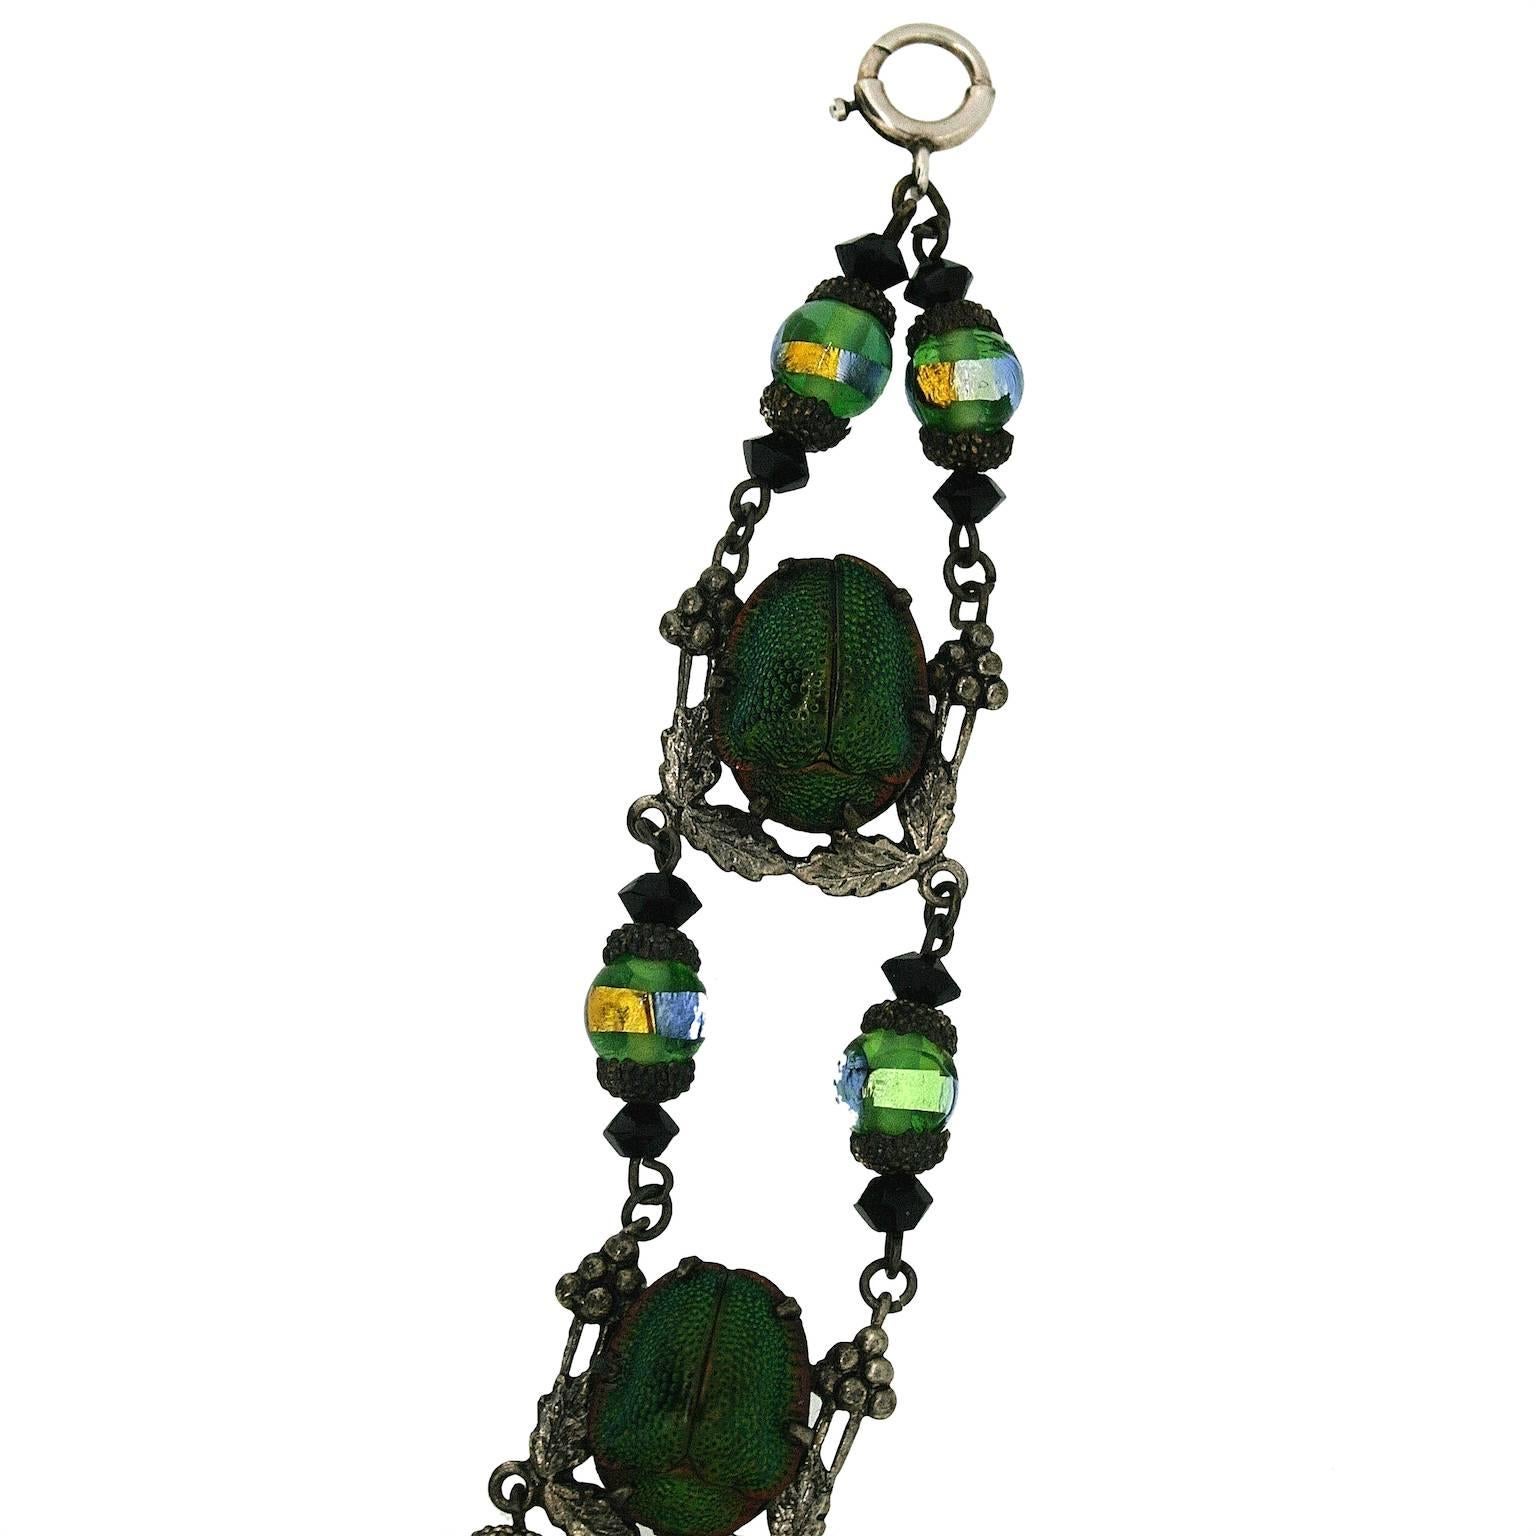 This wonderful bracelet features real beetles and highly collectable peacock foil glass beads. 
Condition Report:
Very Good - The bolt ring catch is possibly more recent than the rest of the piece. This does not detract from the overall appeal of